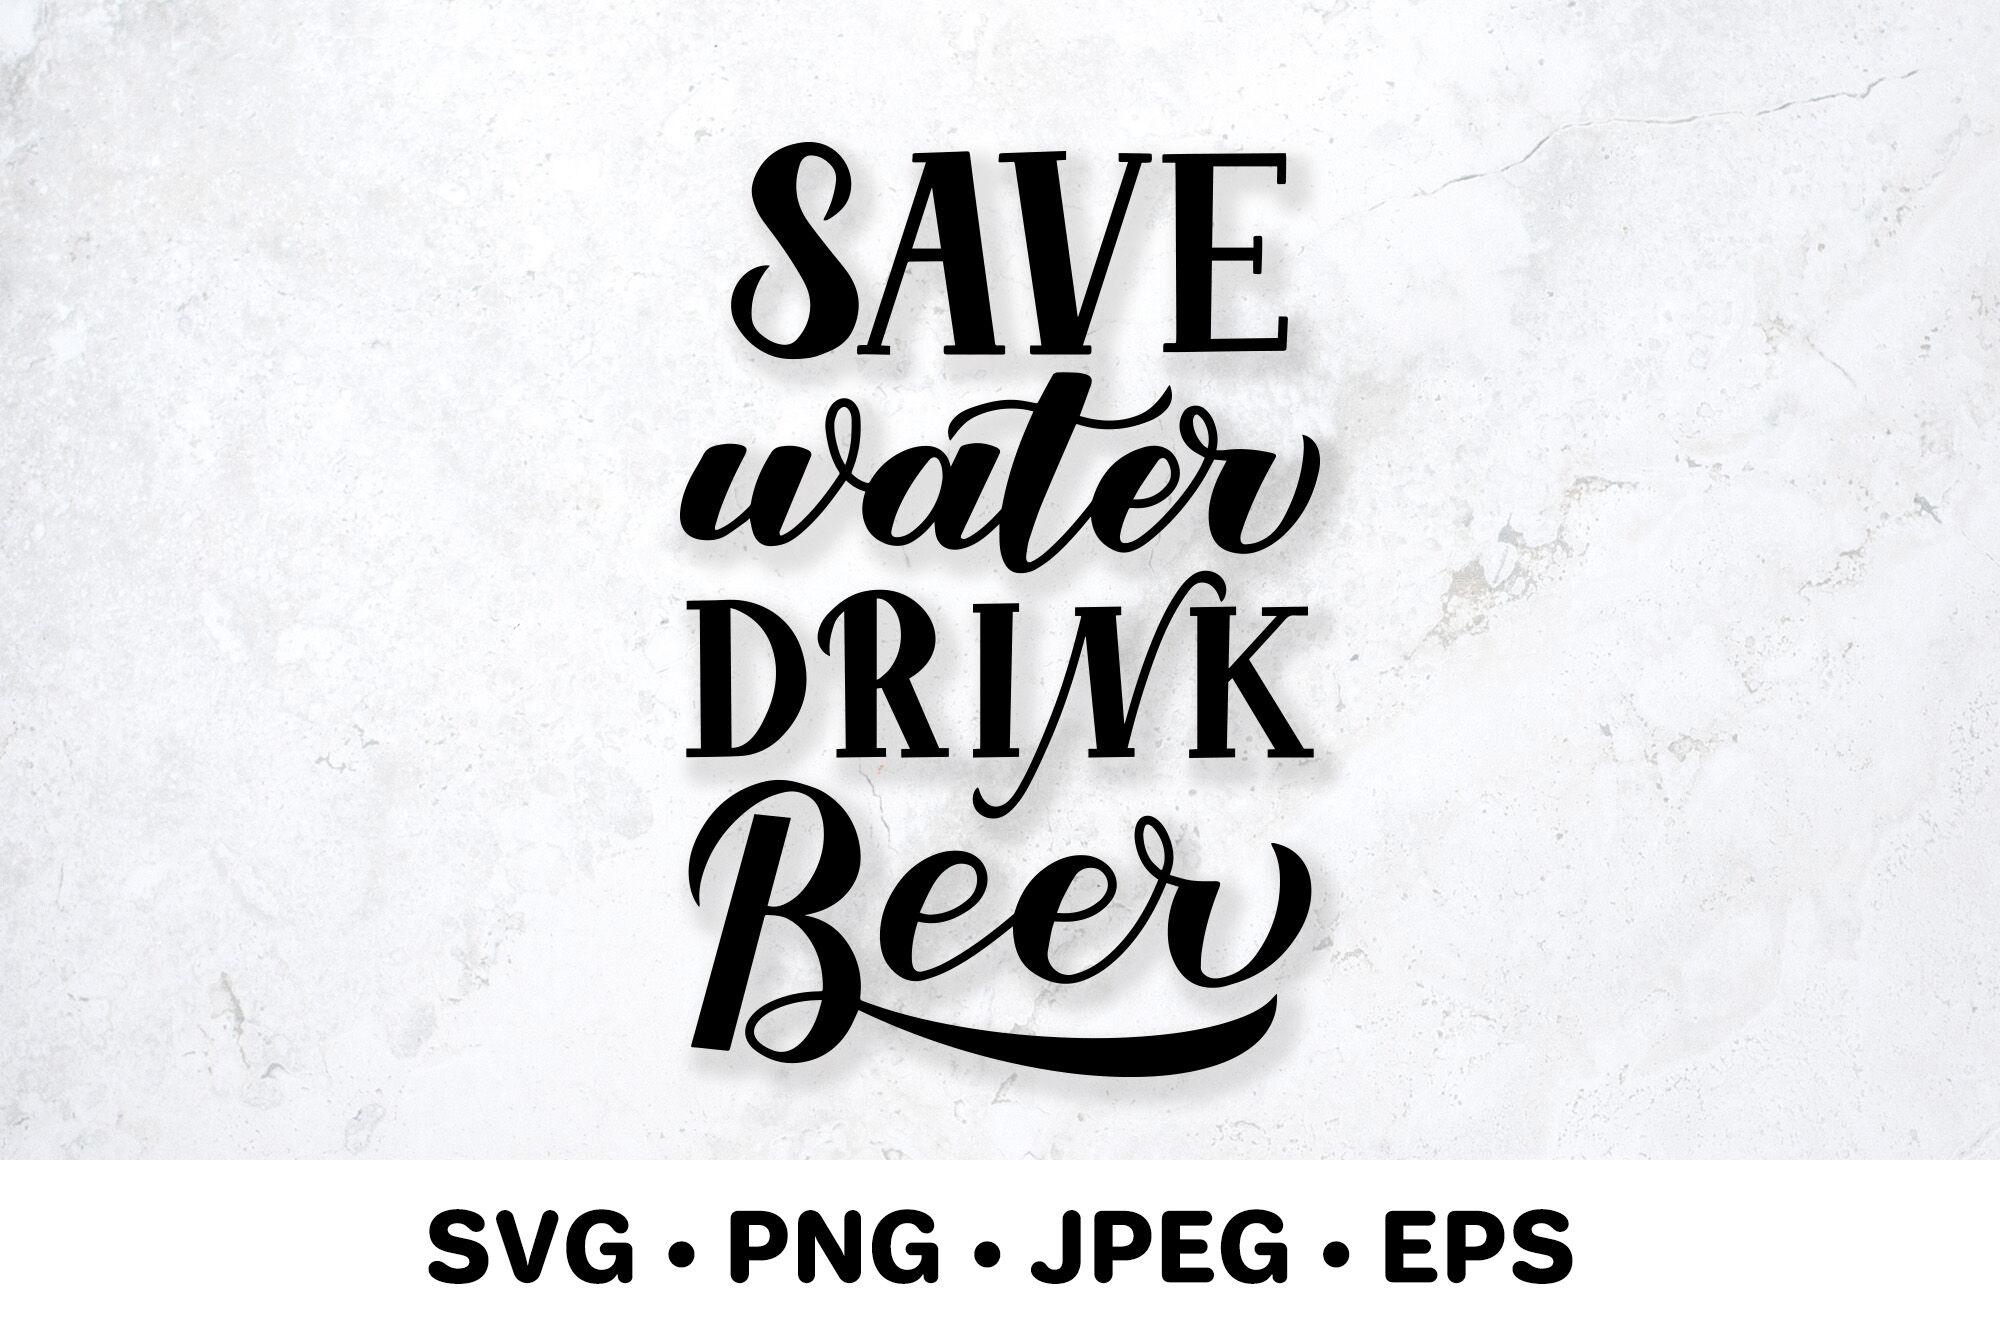 Save water drink beer SVG. Funny drinking quote. By LaBelezoka |  TheHungryJPEG